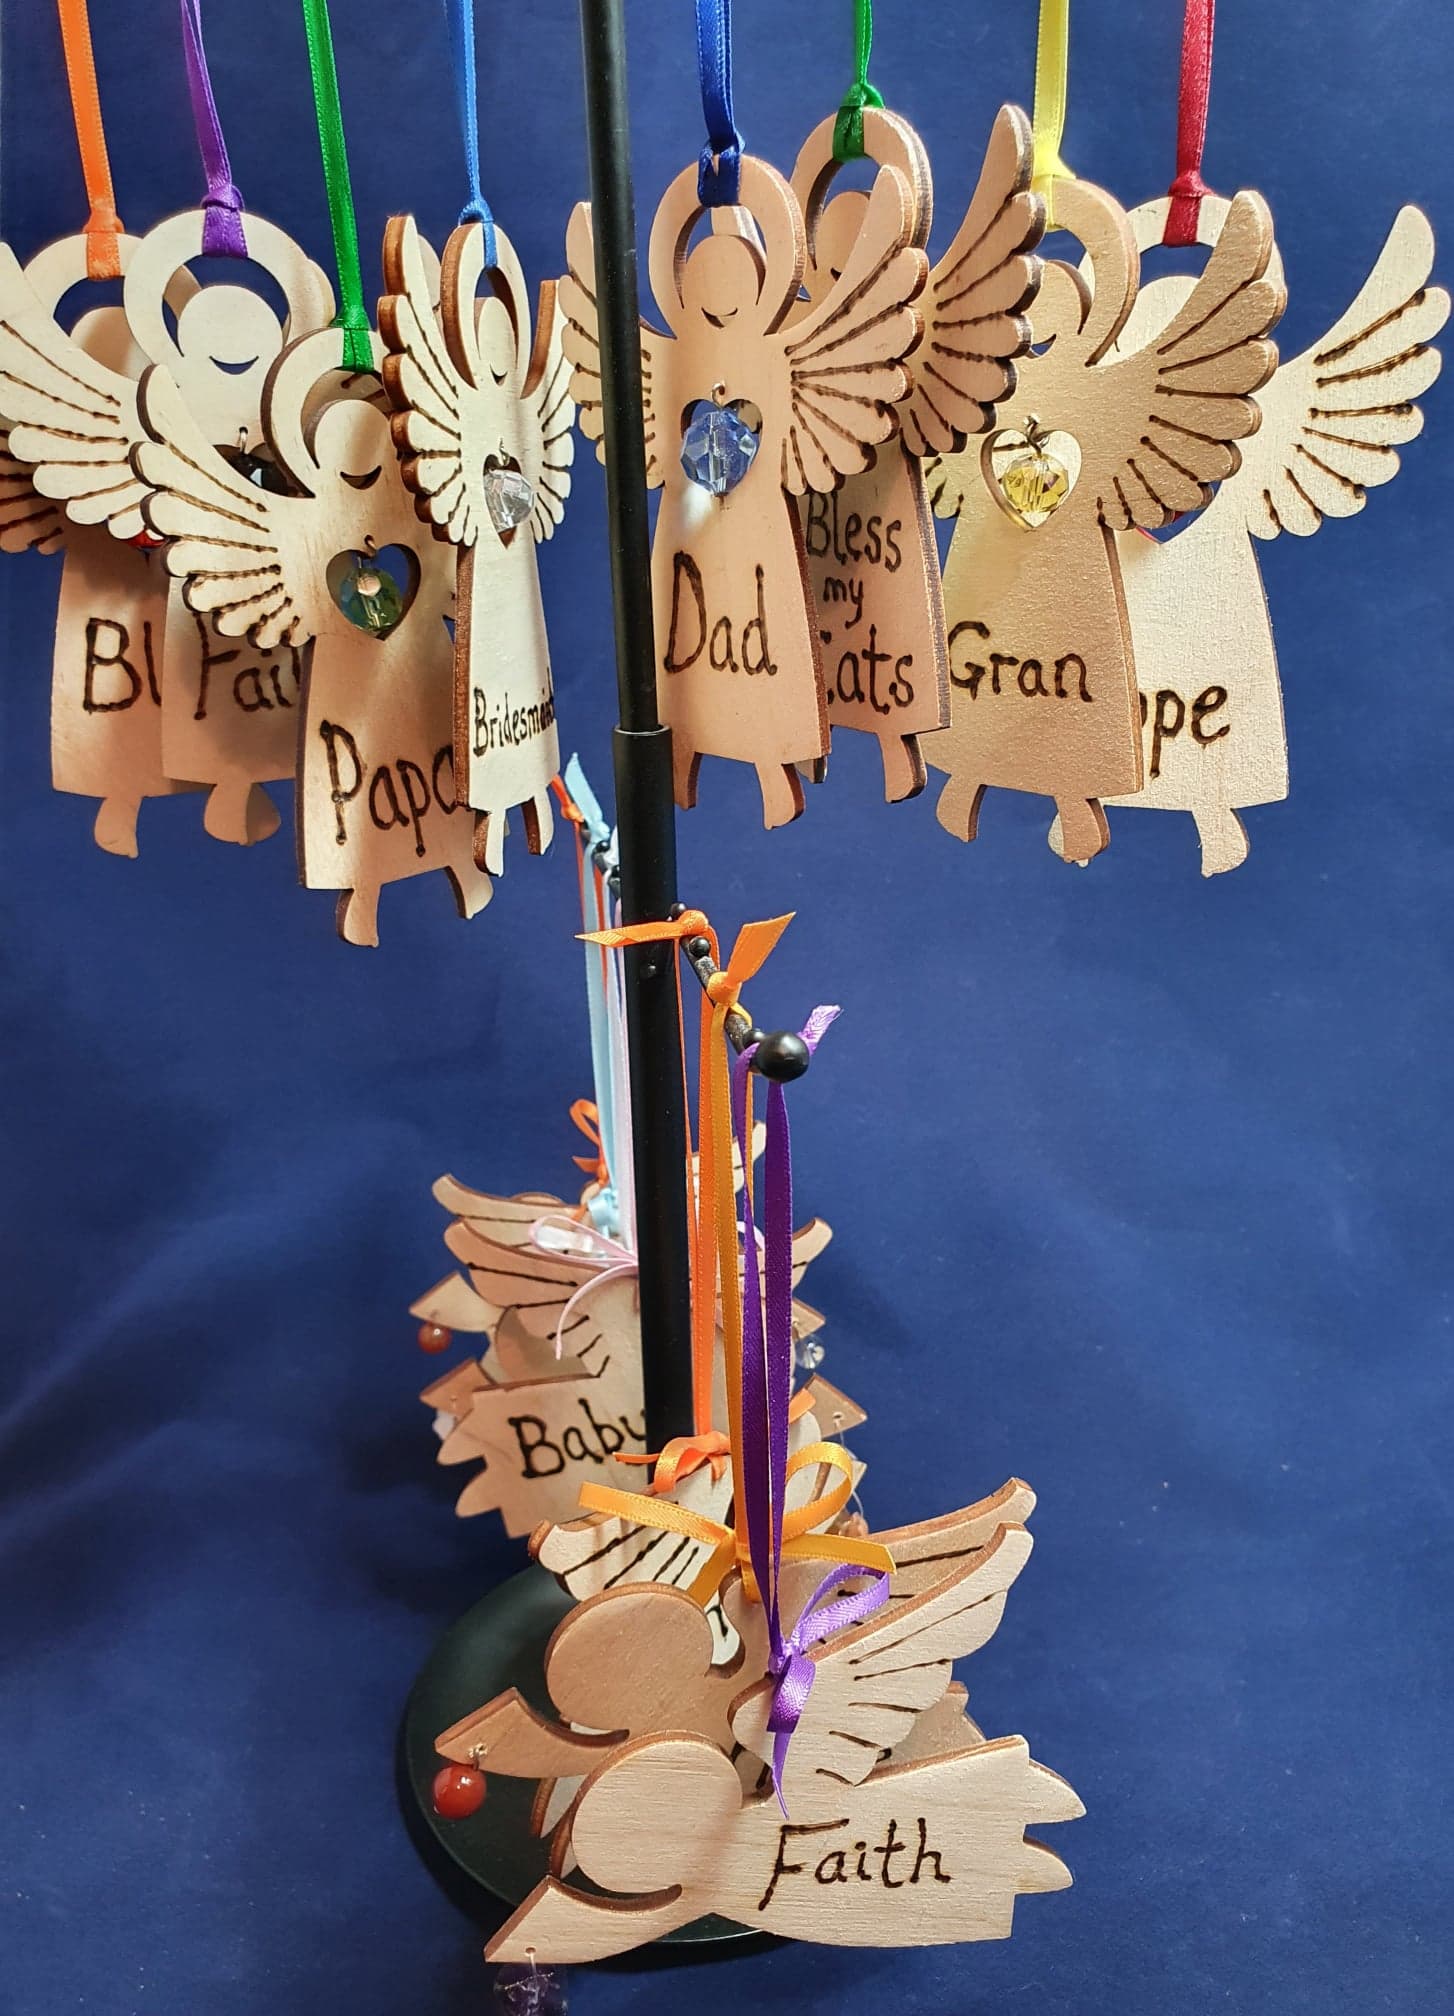 Rustic Charm Angel with word "Bless"